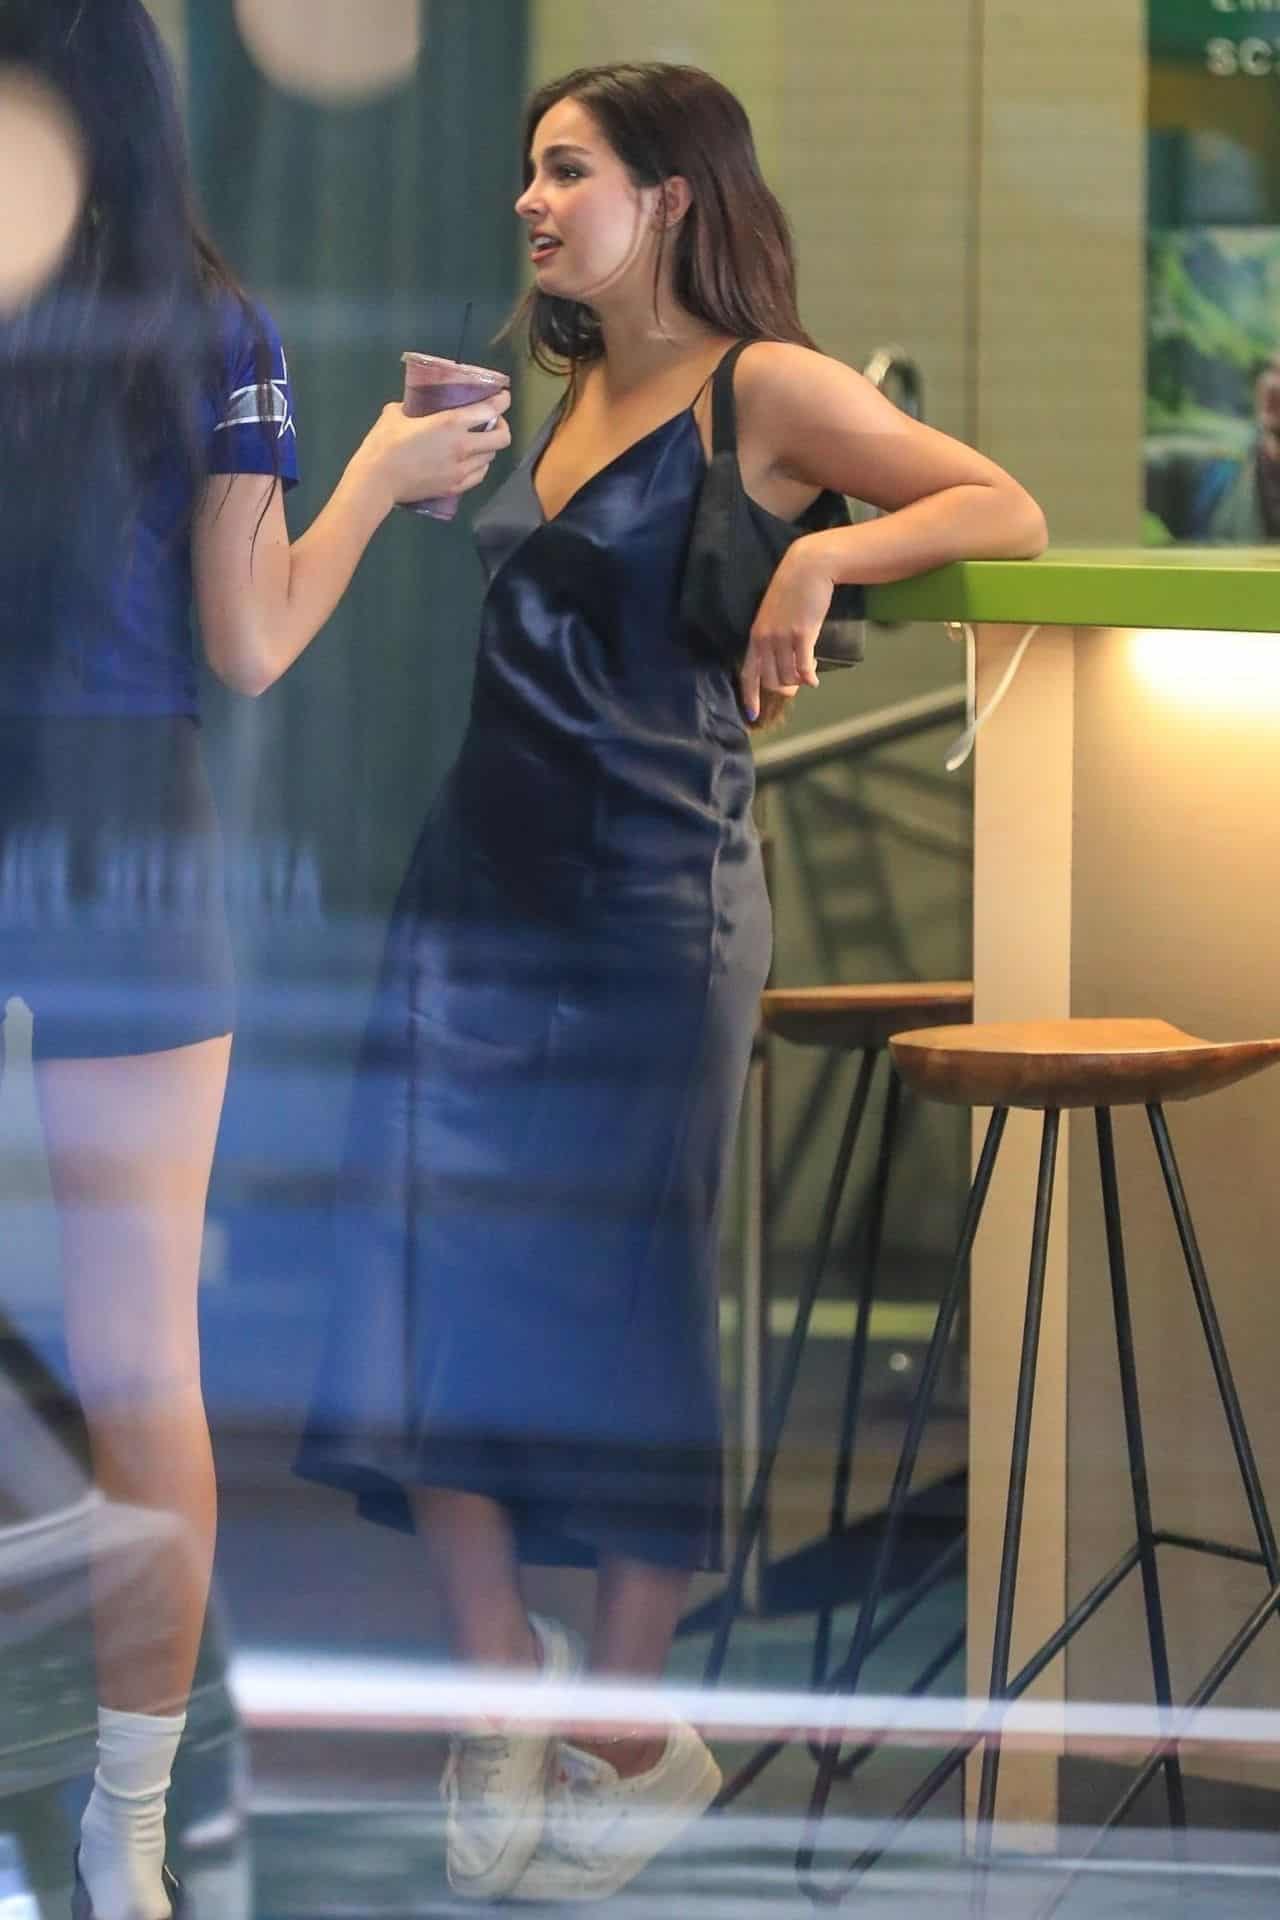 Addison Rae Steps Out in a Blue Dress and Stops by Earthbar for a Smoothie